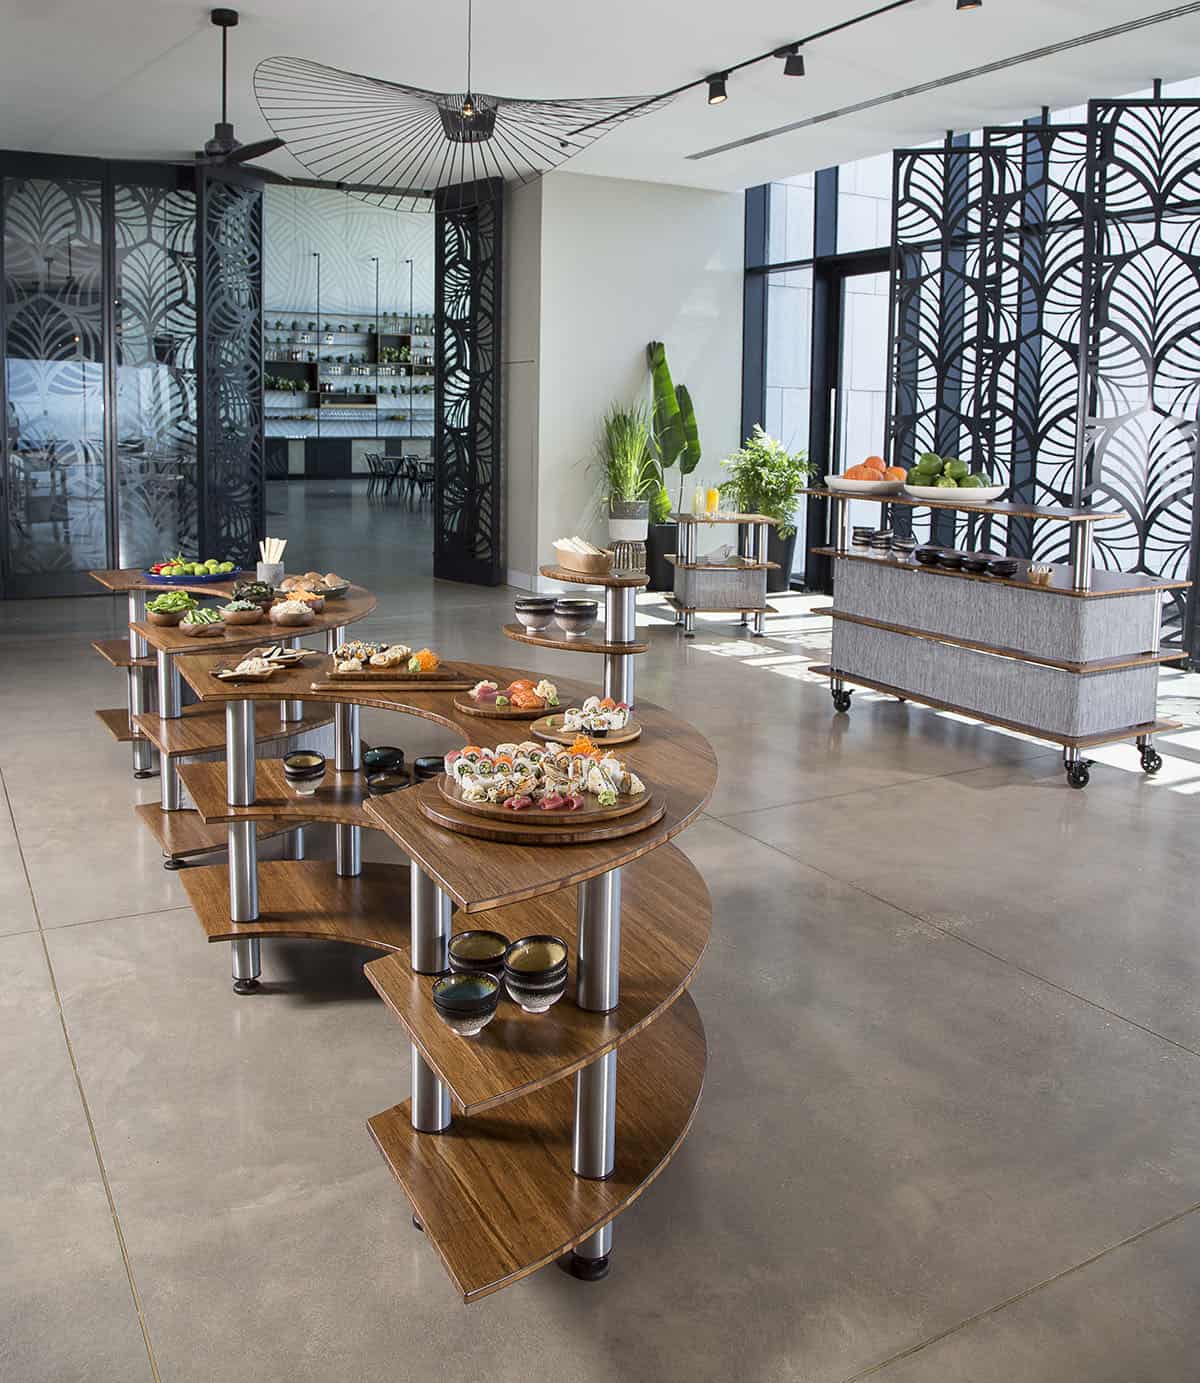 Redefining the Buffet Line With Linenless Banquet Furniture